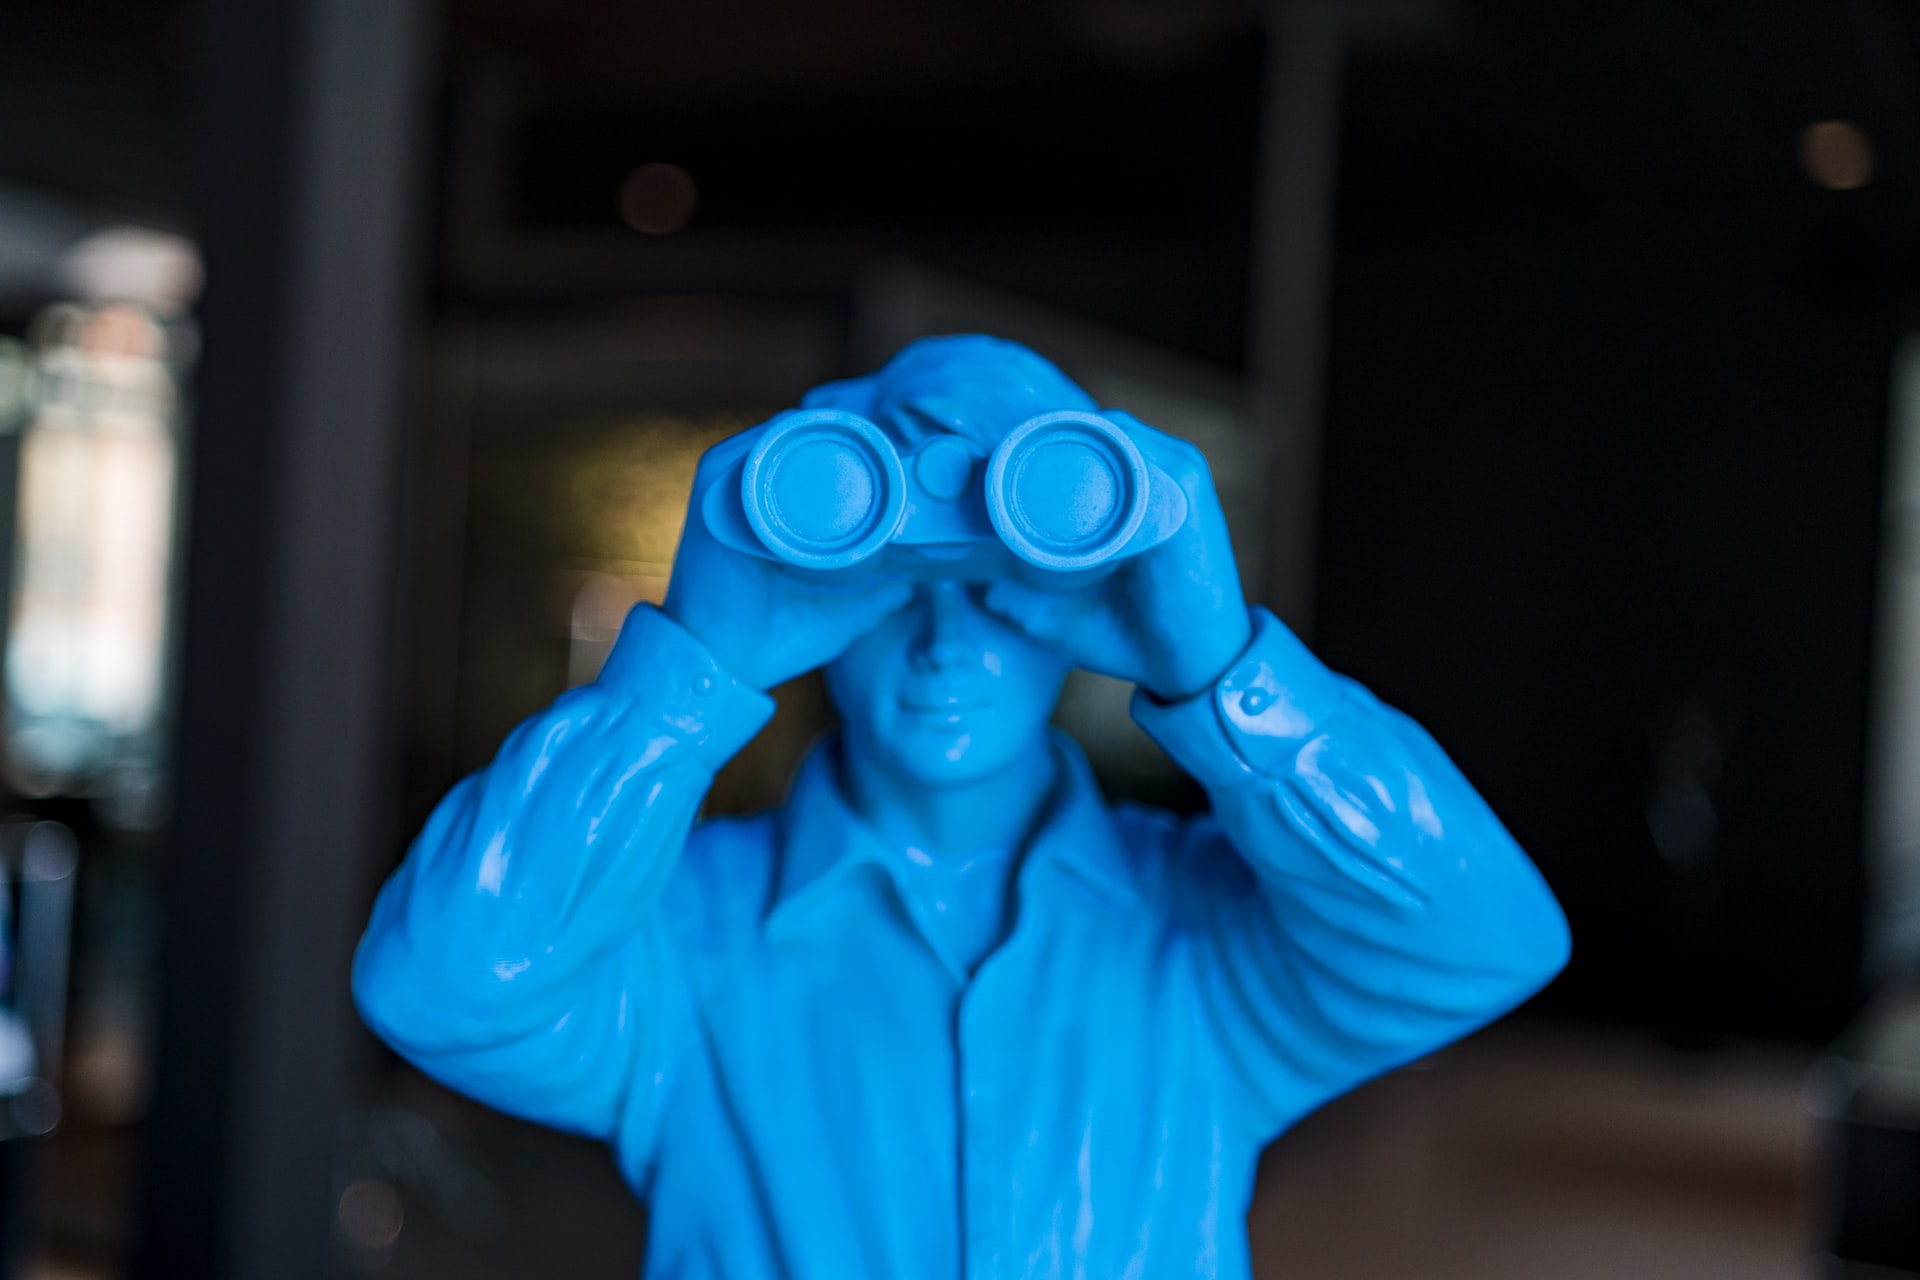 Blue toy army soldier looking out of the screen with plastic binoculars